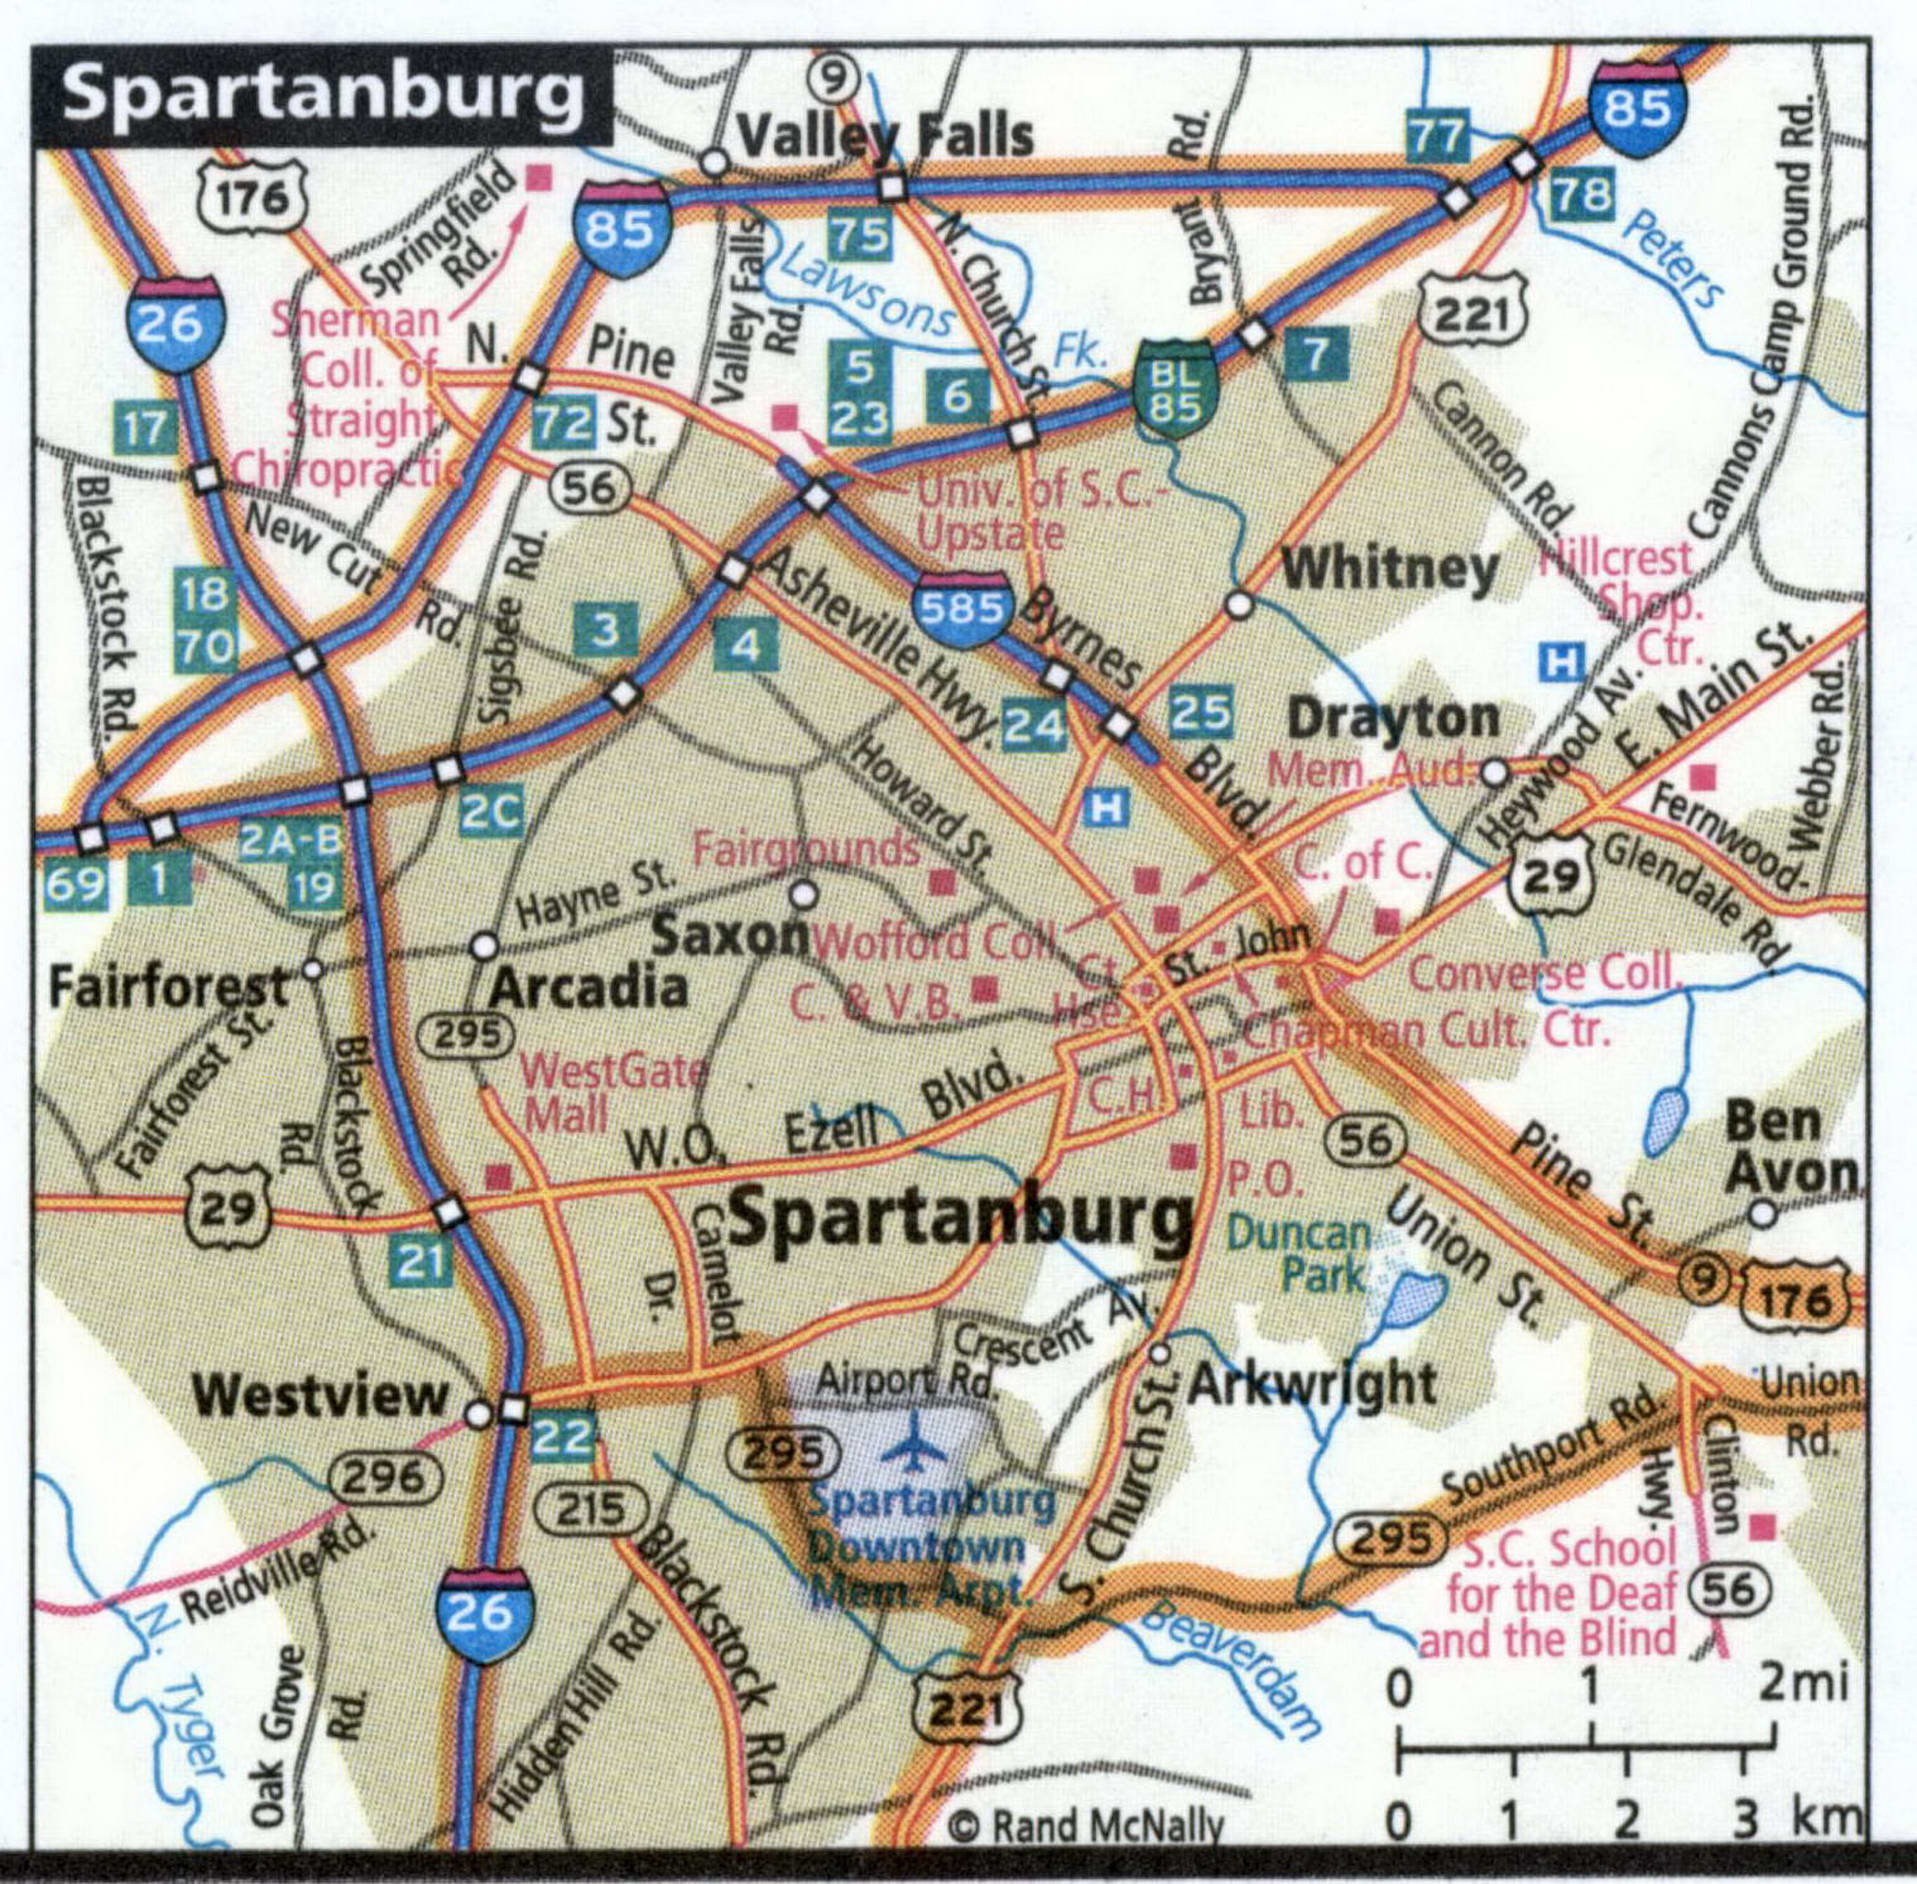 Spartanburg city map for truckers